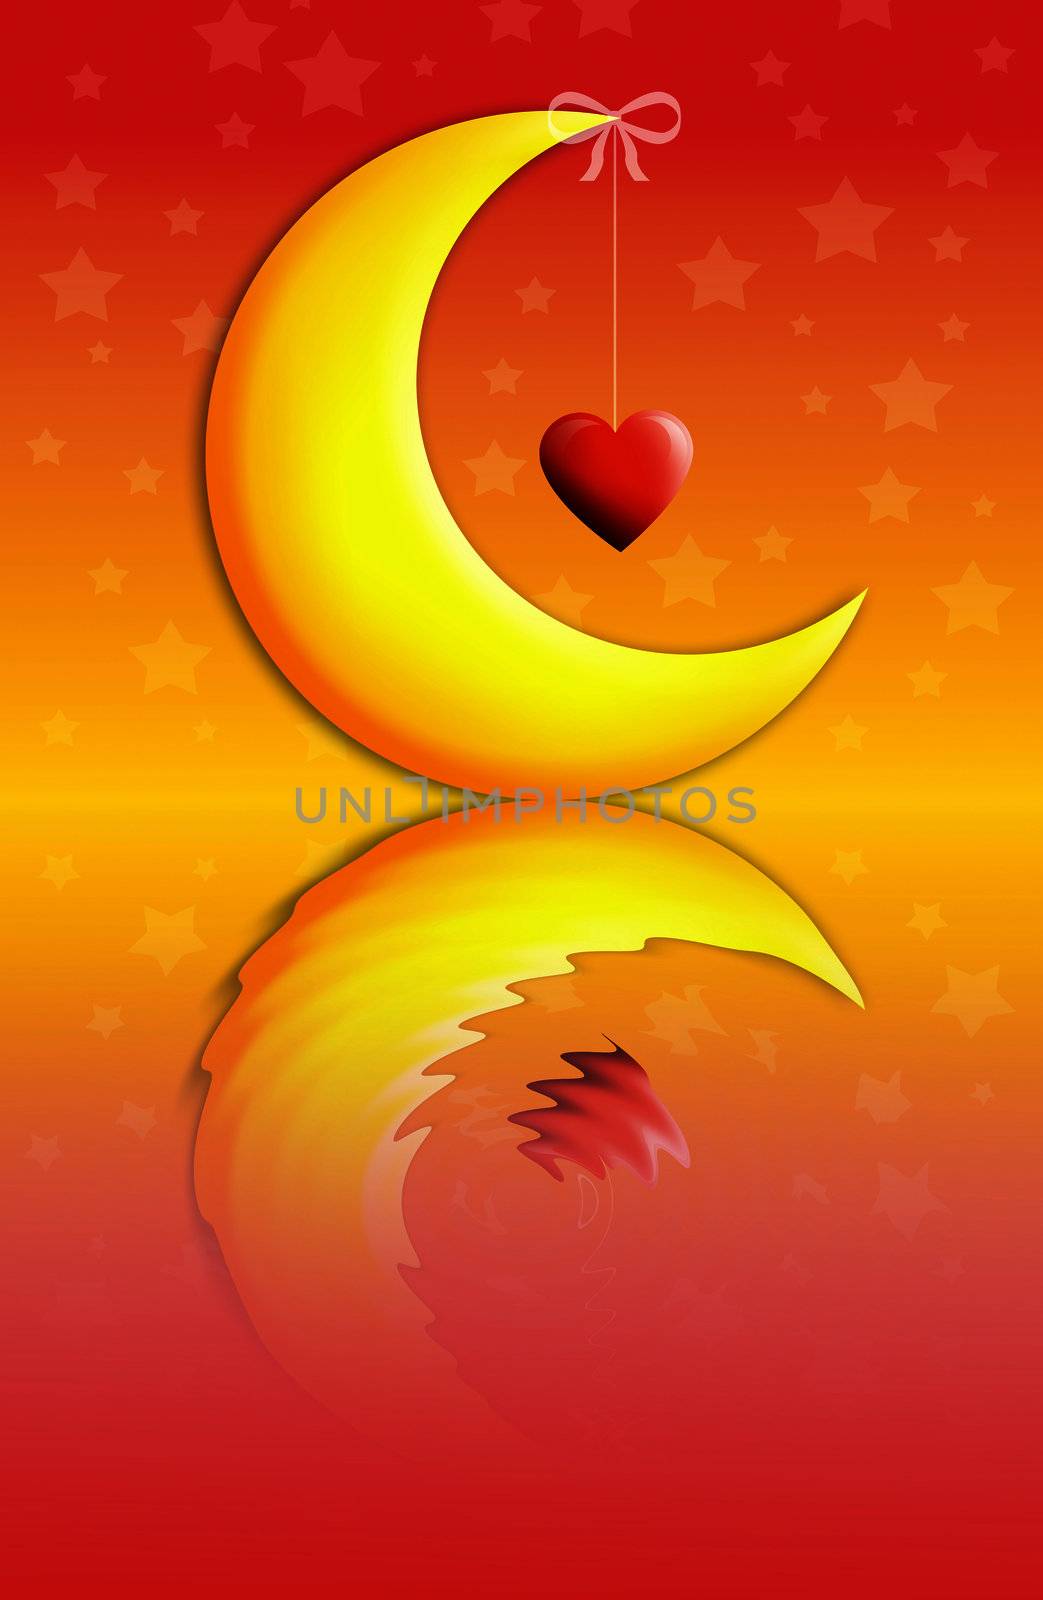 moon and heart for Happy Valentine's Day